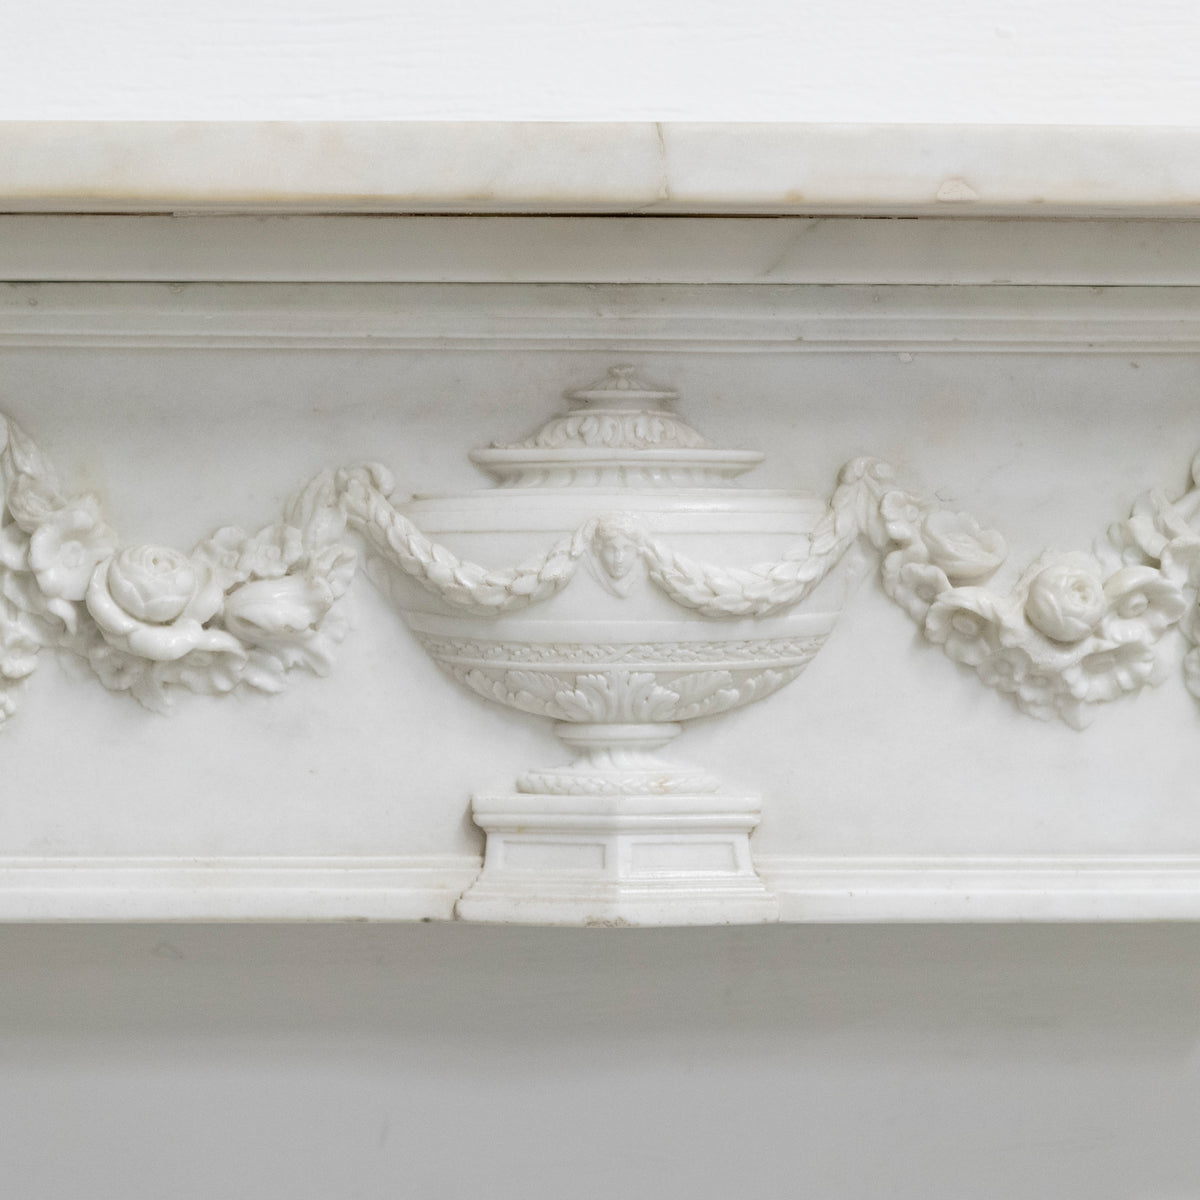 Antique Regency Statuary Marble Fireplace Surround | The Architectural Forum